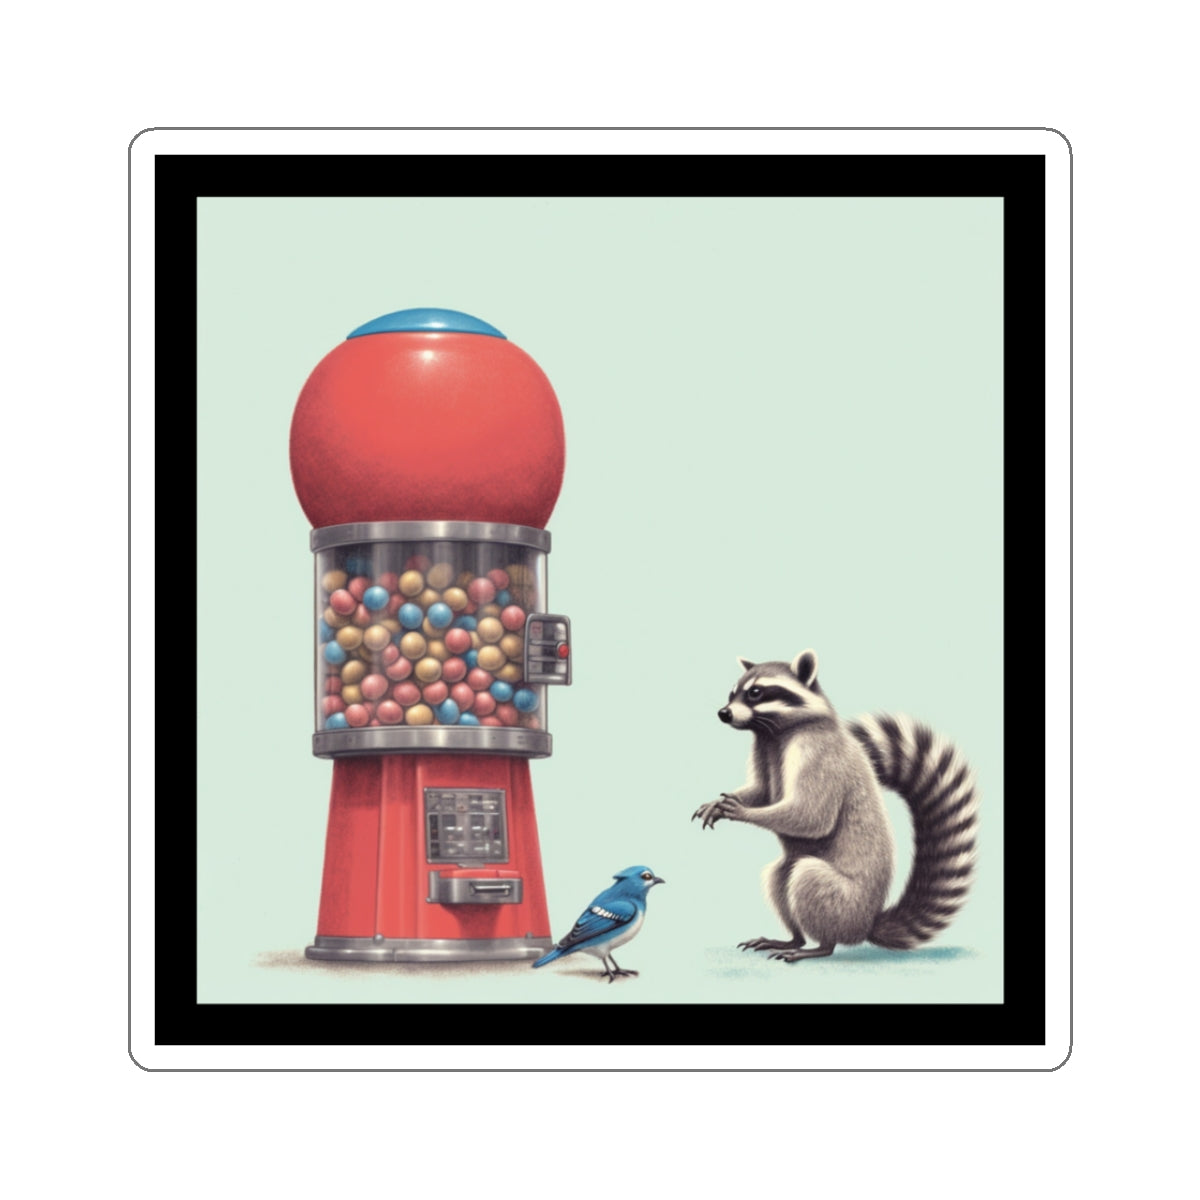 Just a raccoon and bluejay standing next to a gumball machine